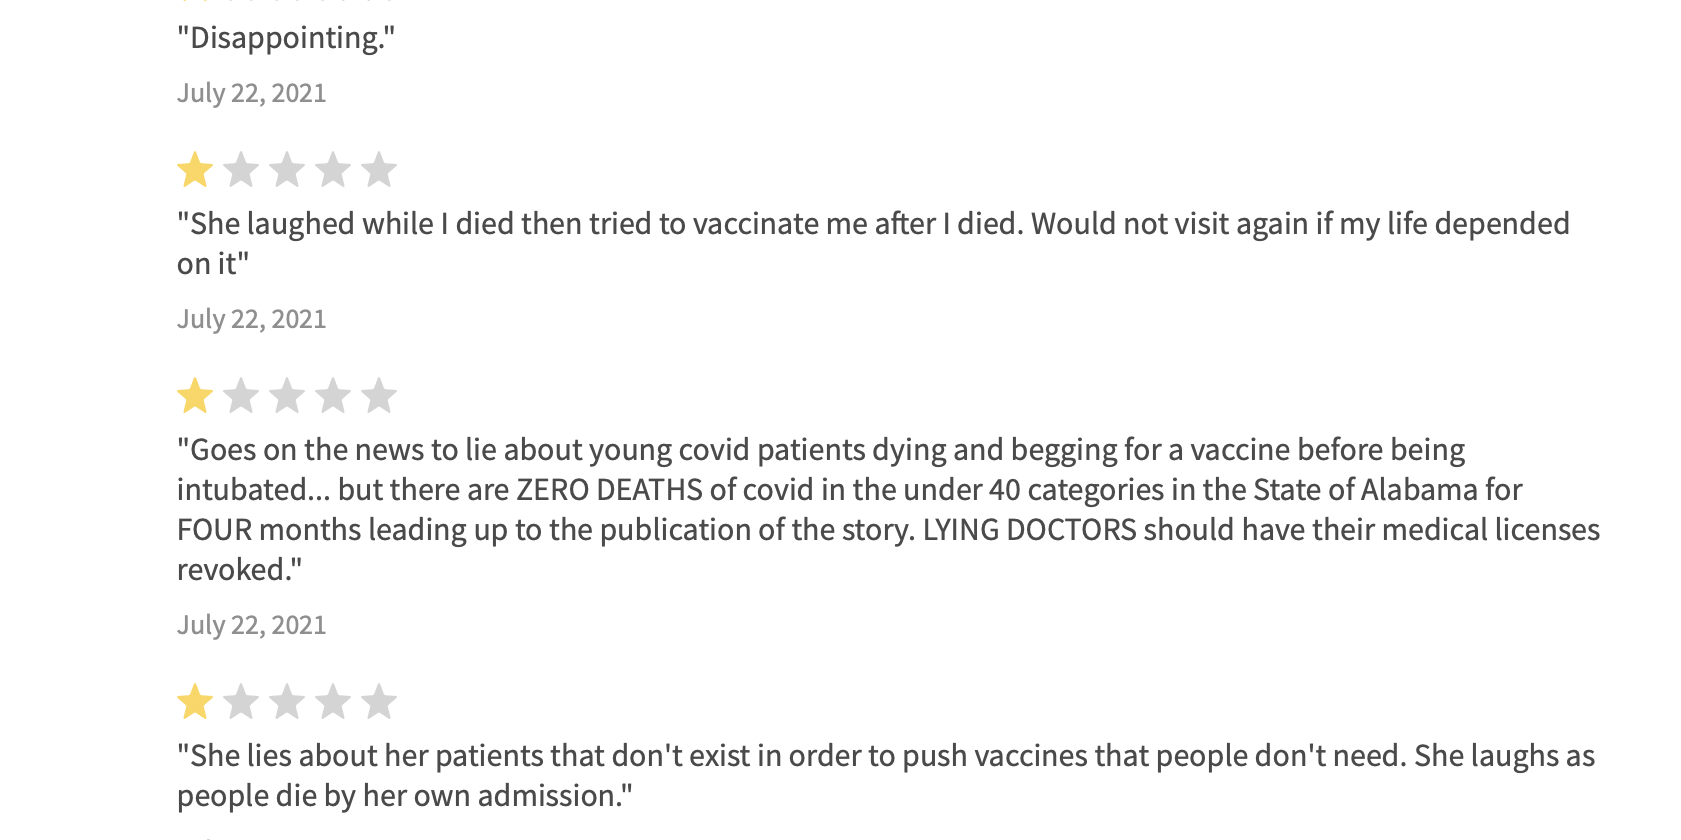 A screenshot of recent sham reviews of Dr Brytney Cobia, who is being trolled for begging people to get vaccinated against COVID-19